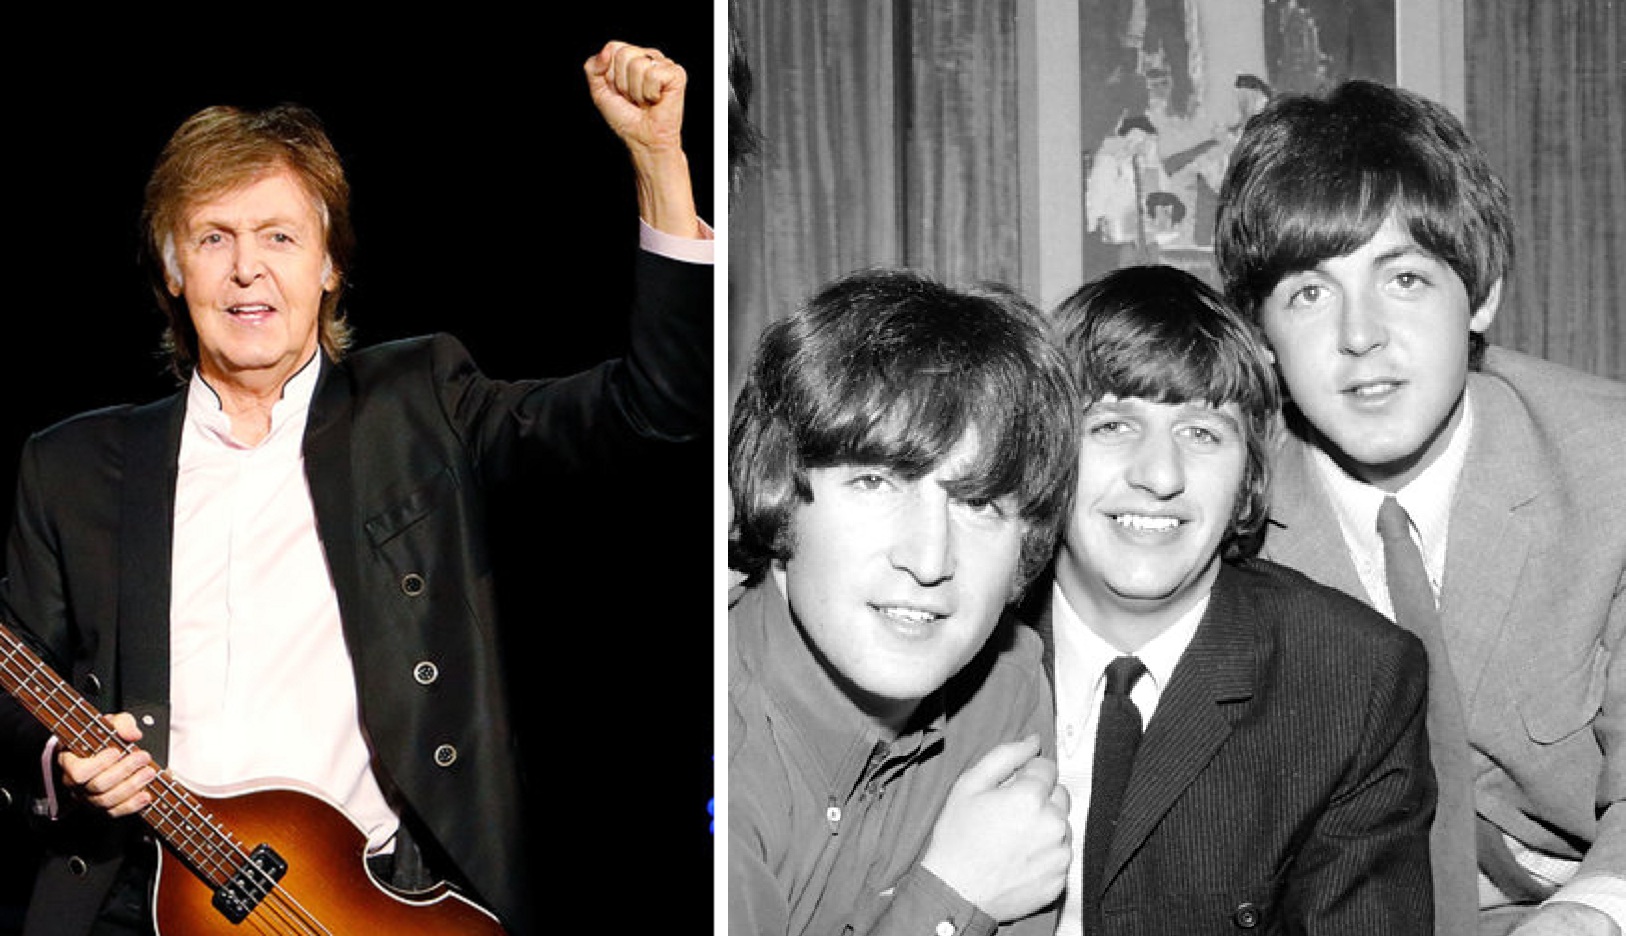 Paul McCartney Remembers When He and John Lennon Used to…ahem, Masturbate together!